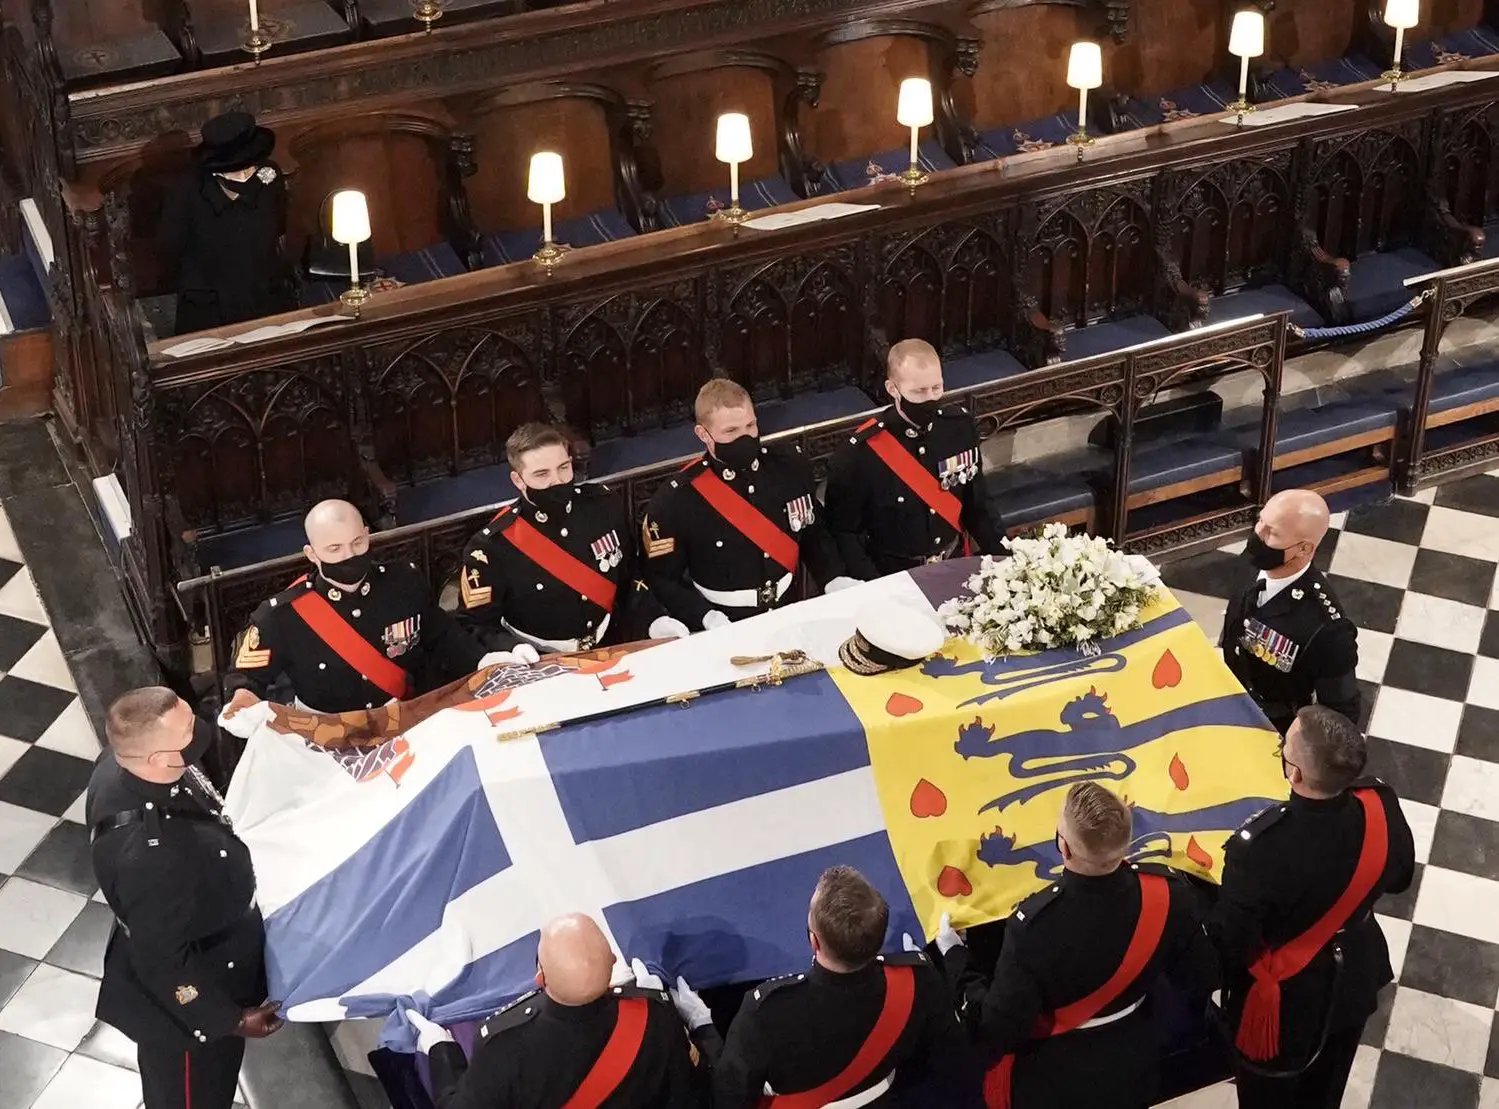 The Duke’s Coffin was covered in his personal standard and carried his sword, naval cap, and a wreath of flowers with a message from Her Majesty